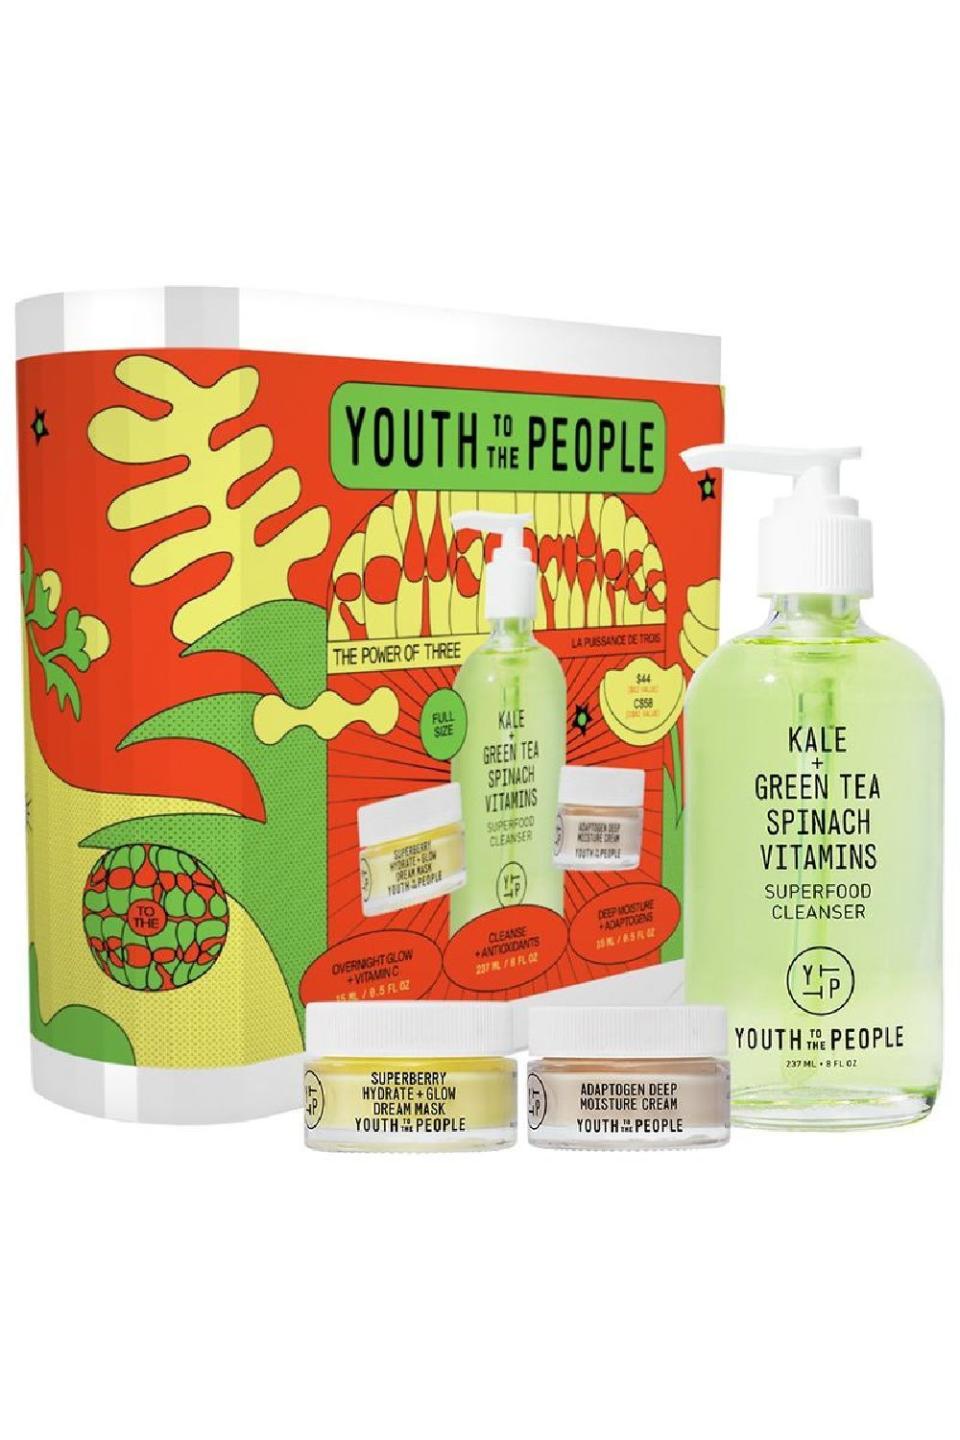 9) Youth To The People The Power of Three Holiday Kit